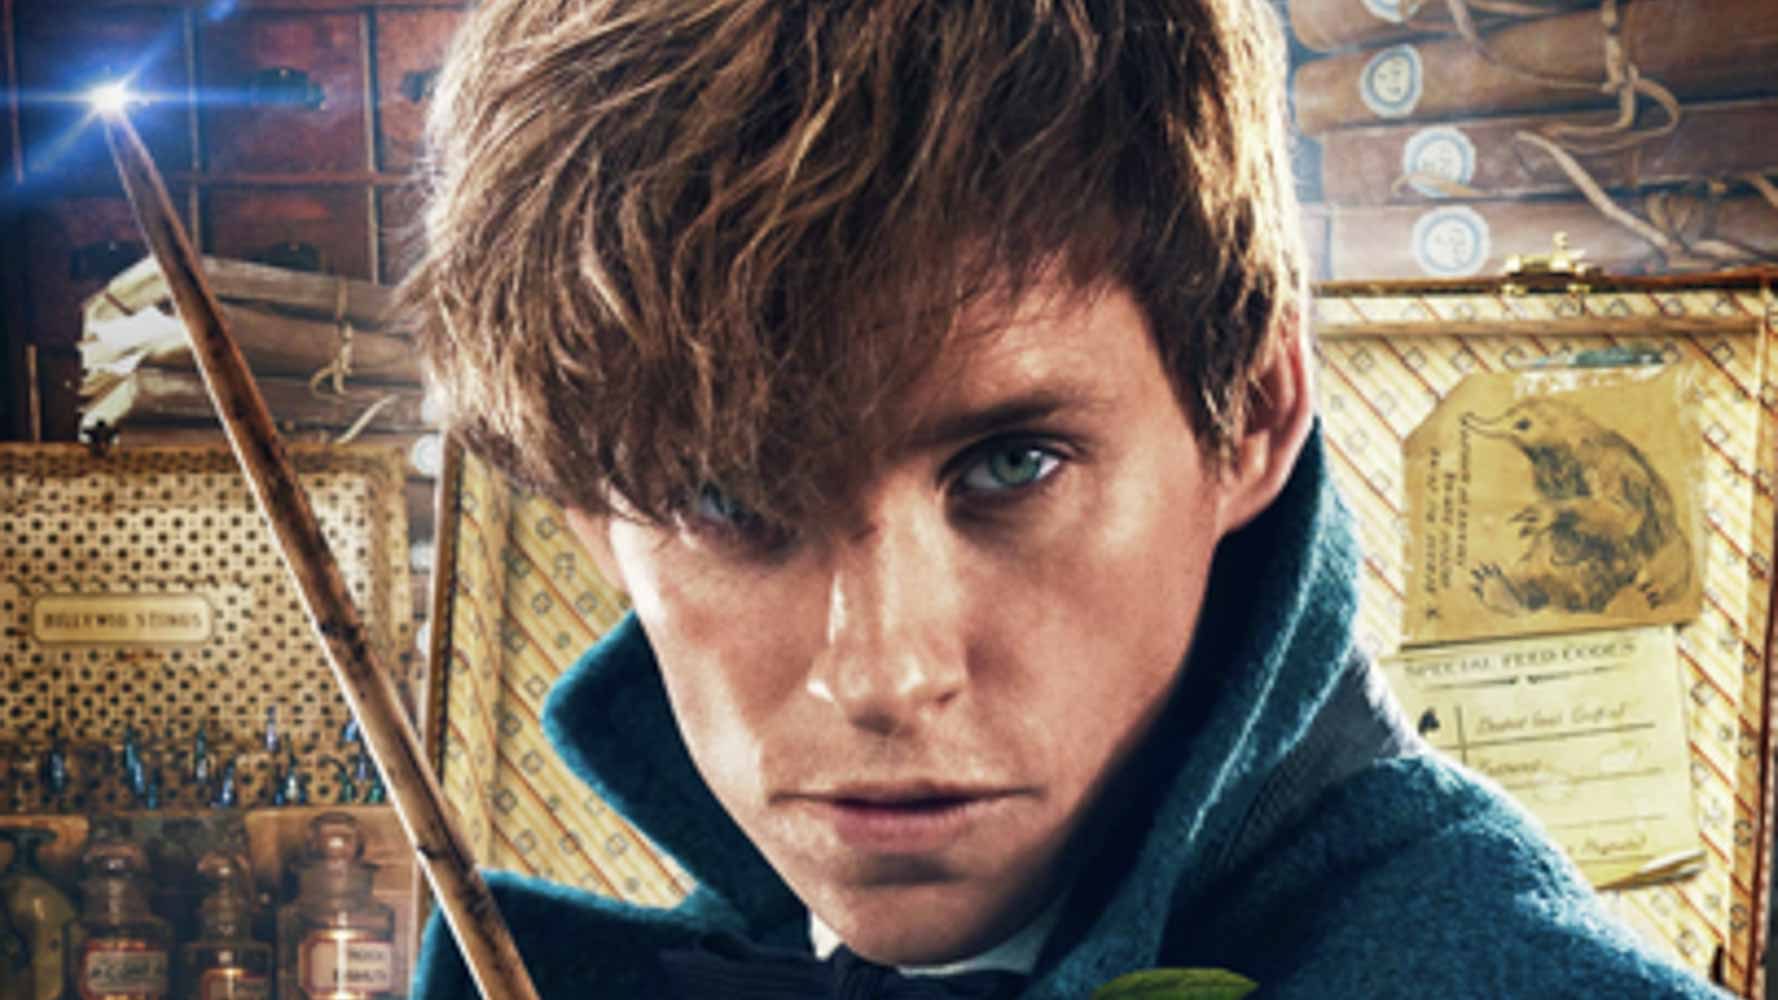 Movie reviews: What critics are saying about ‘Fantastic Beasts’